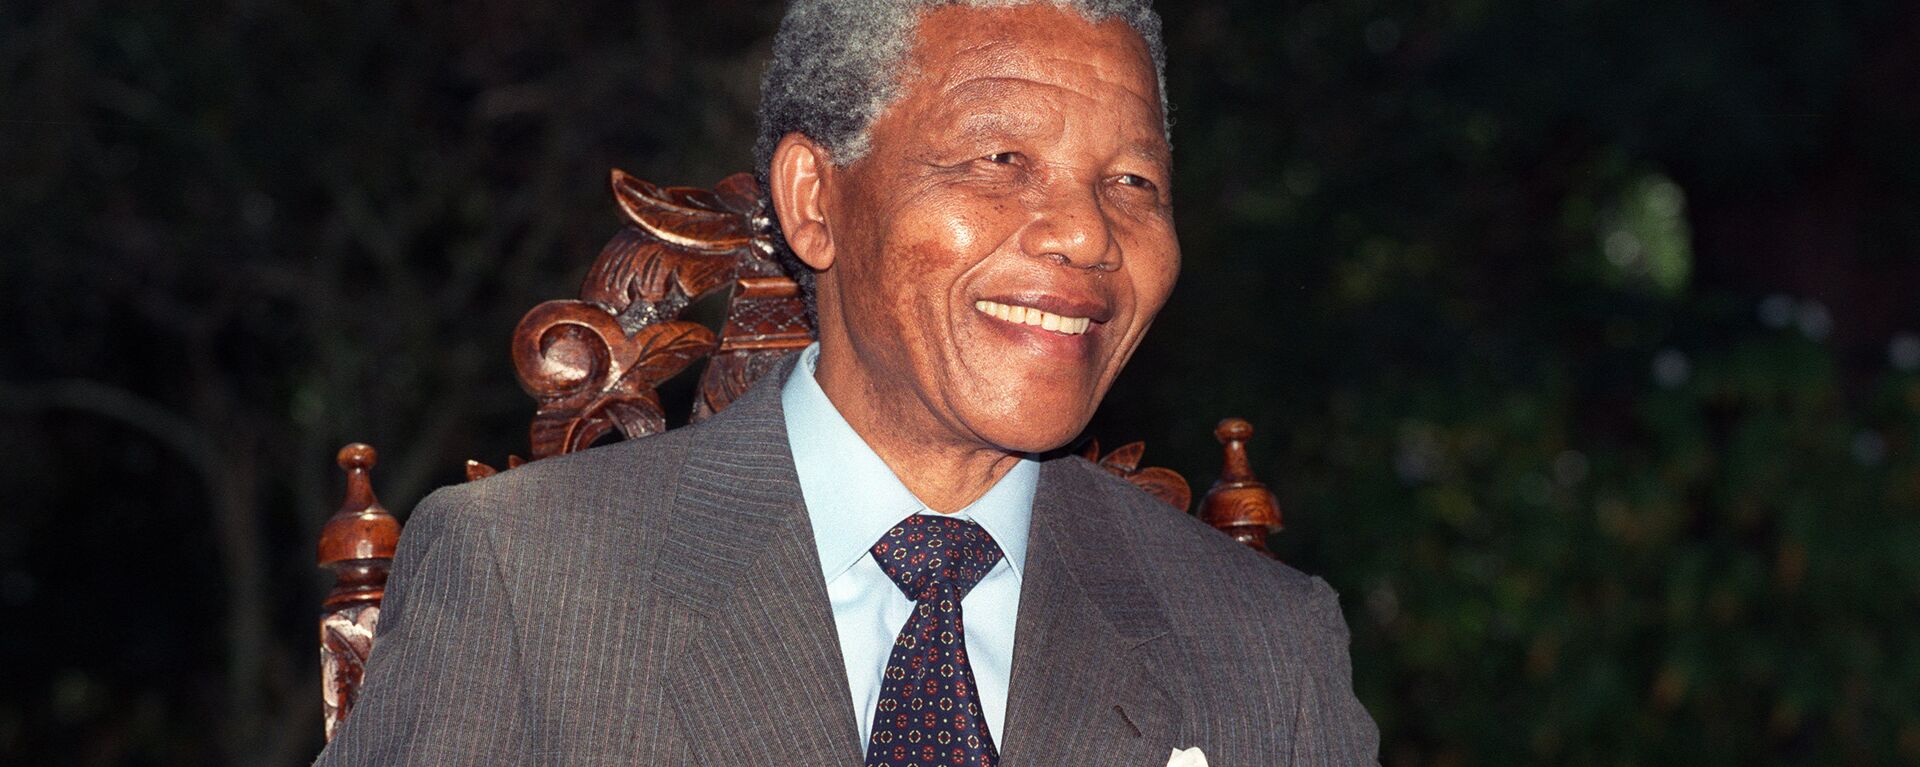 Anti-apartheid leader and African National Congress (ANC) member Nelson Mandela smiles during a photo session after his first press conference since his release from jail, 12 February 1990 in Cape Town. (File) - Sputnik International, 1920, 15.05.2016